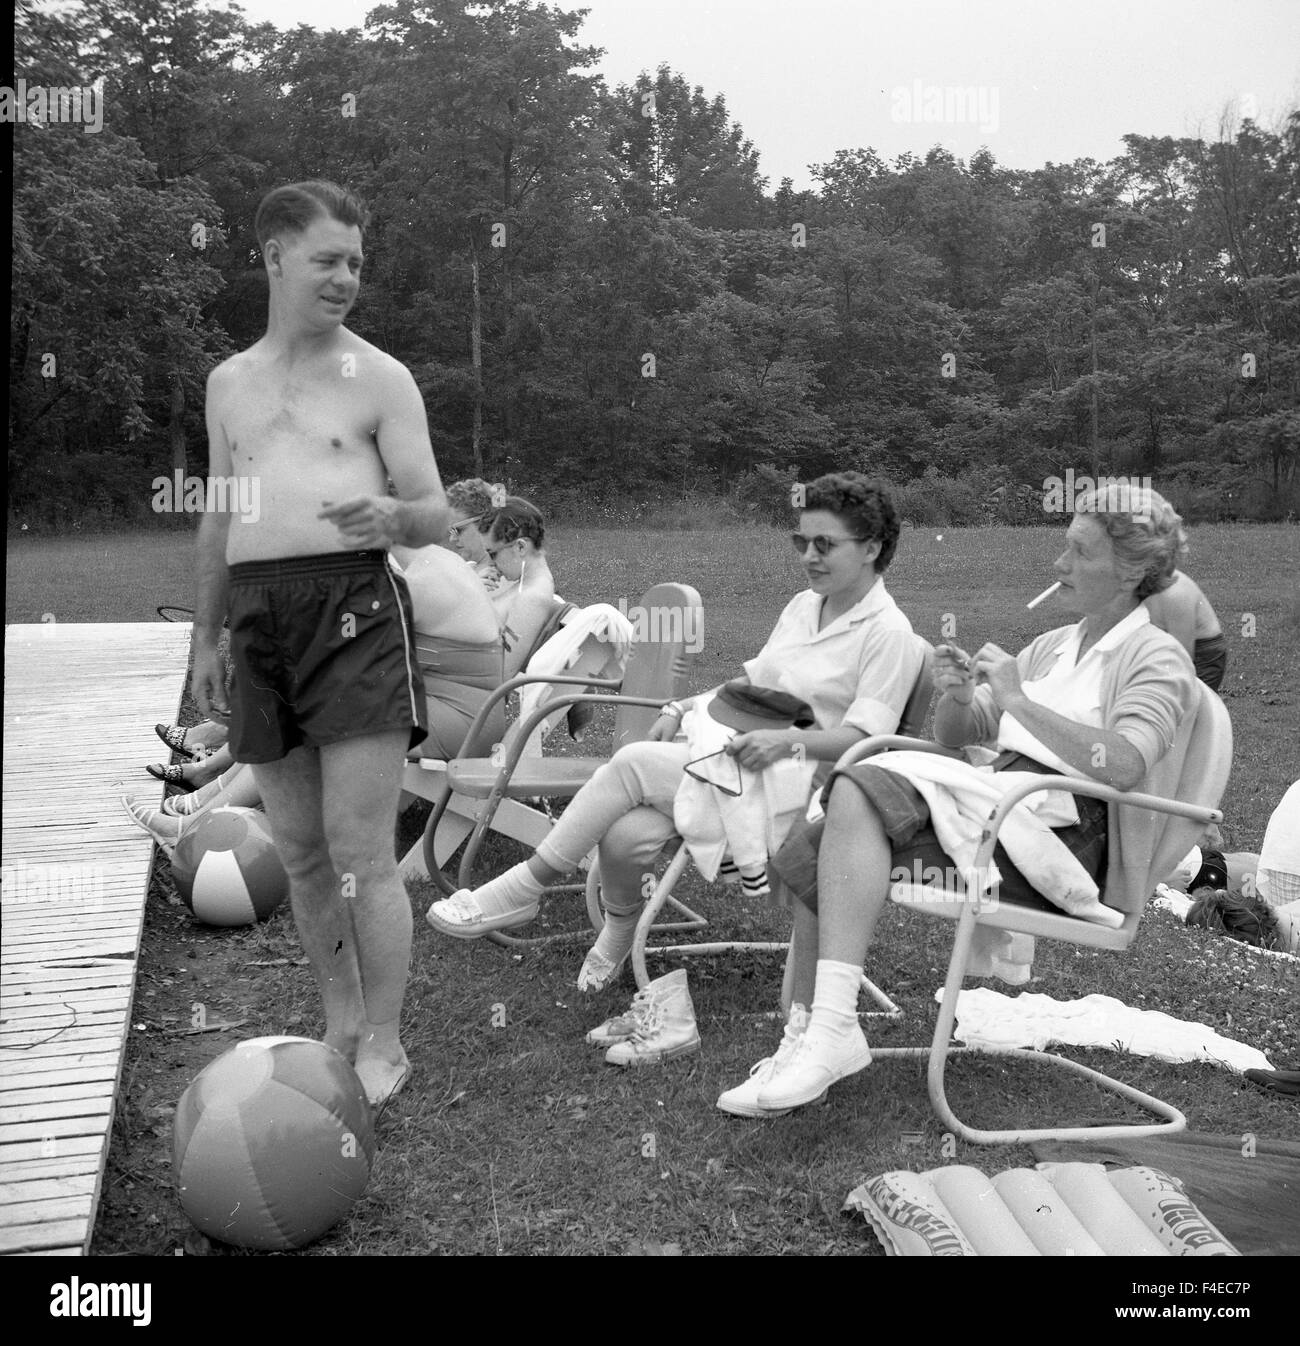 Women sitting on lawn chairs during the summer next to pool with young man talking with them Stock Photo